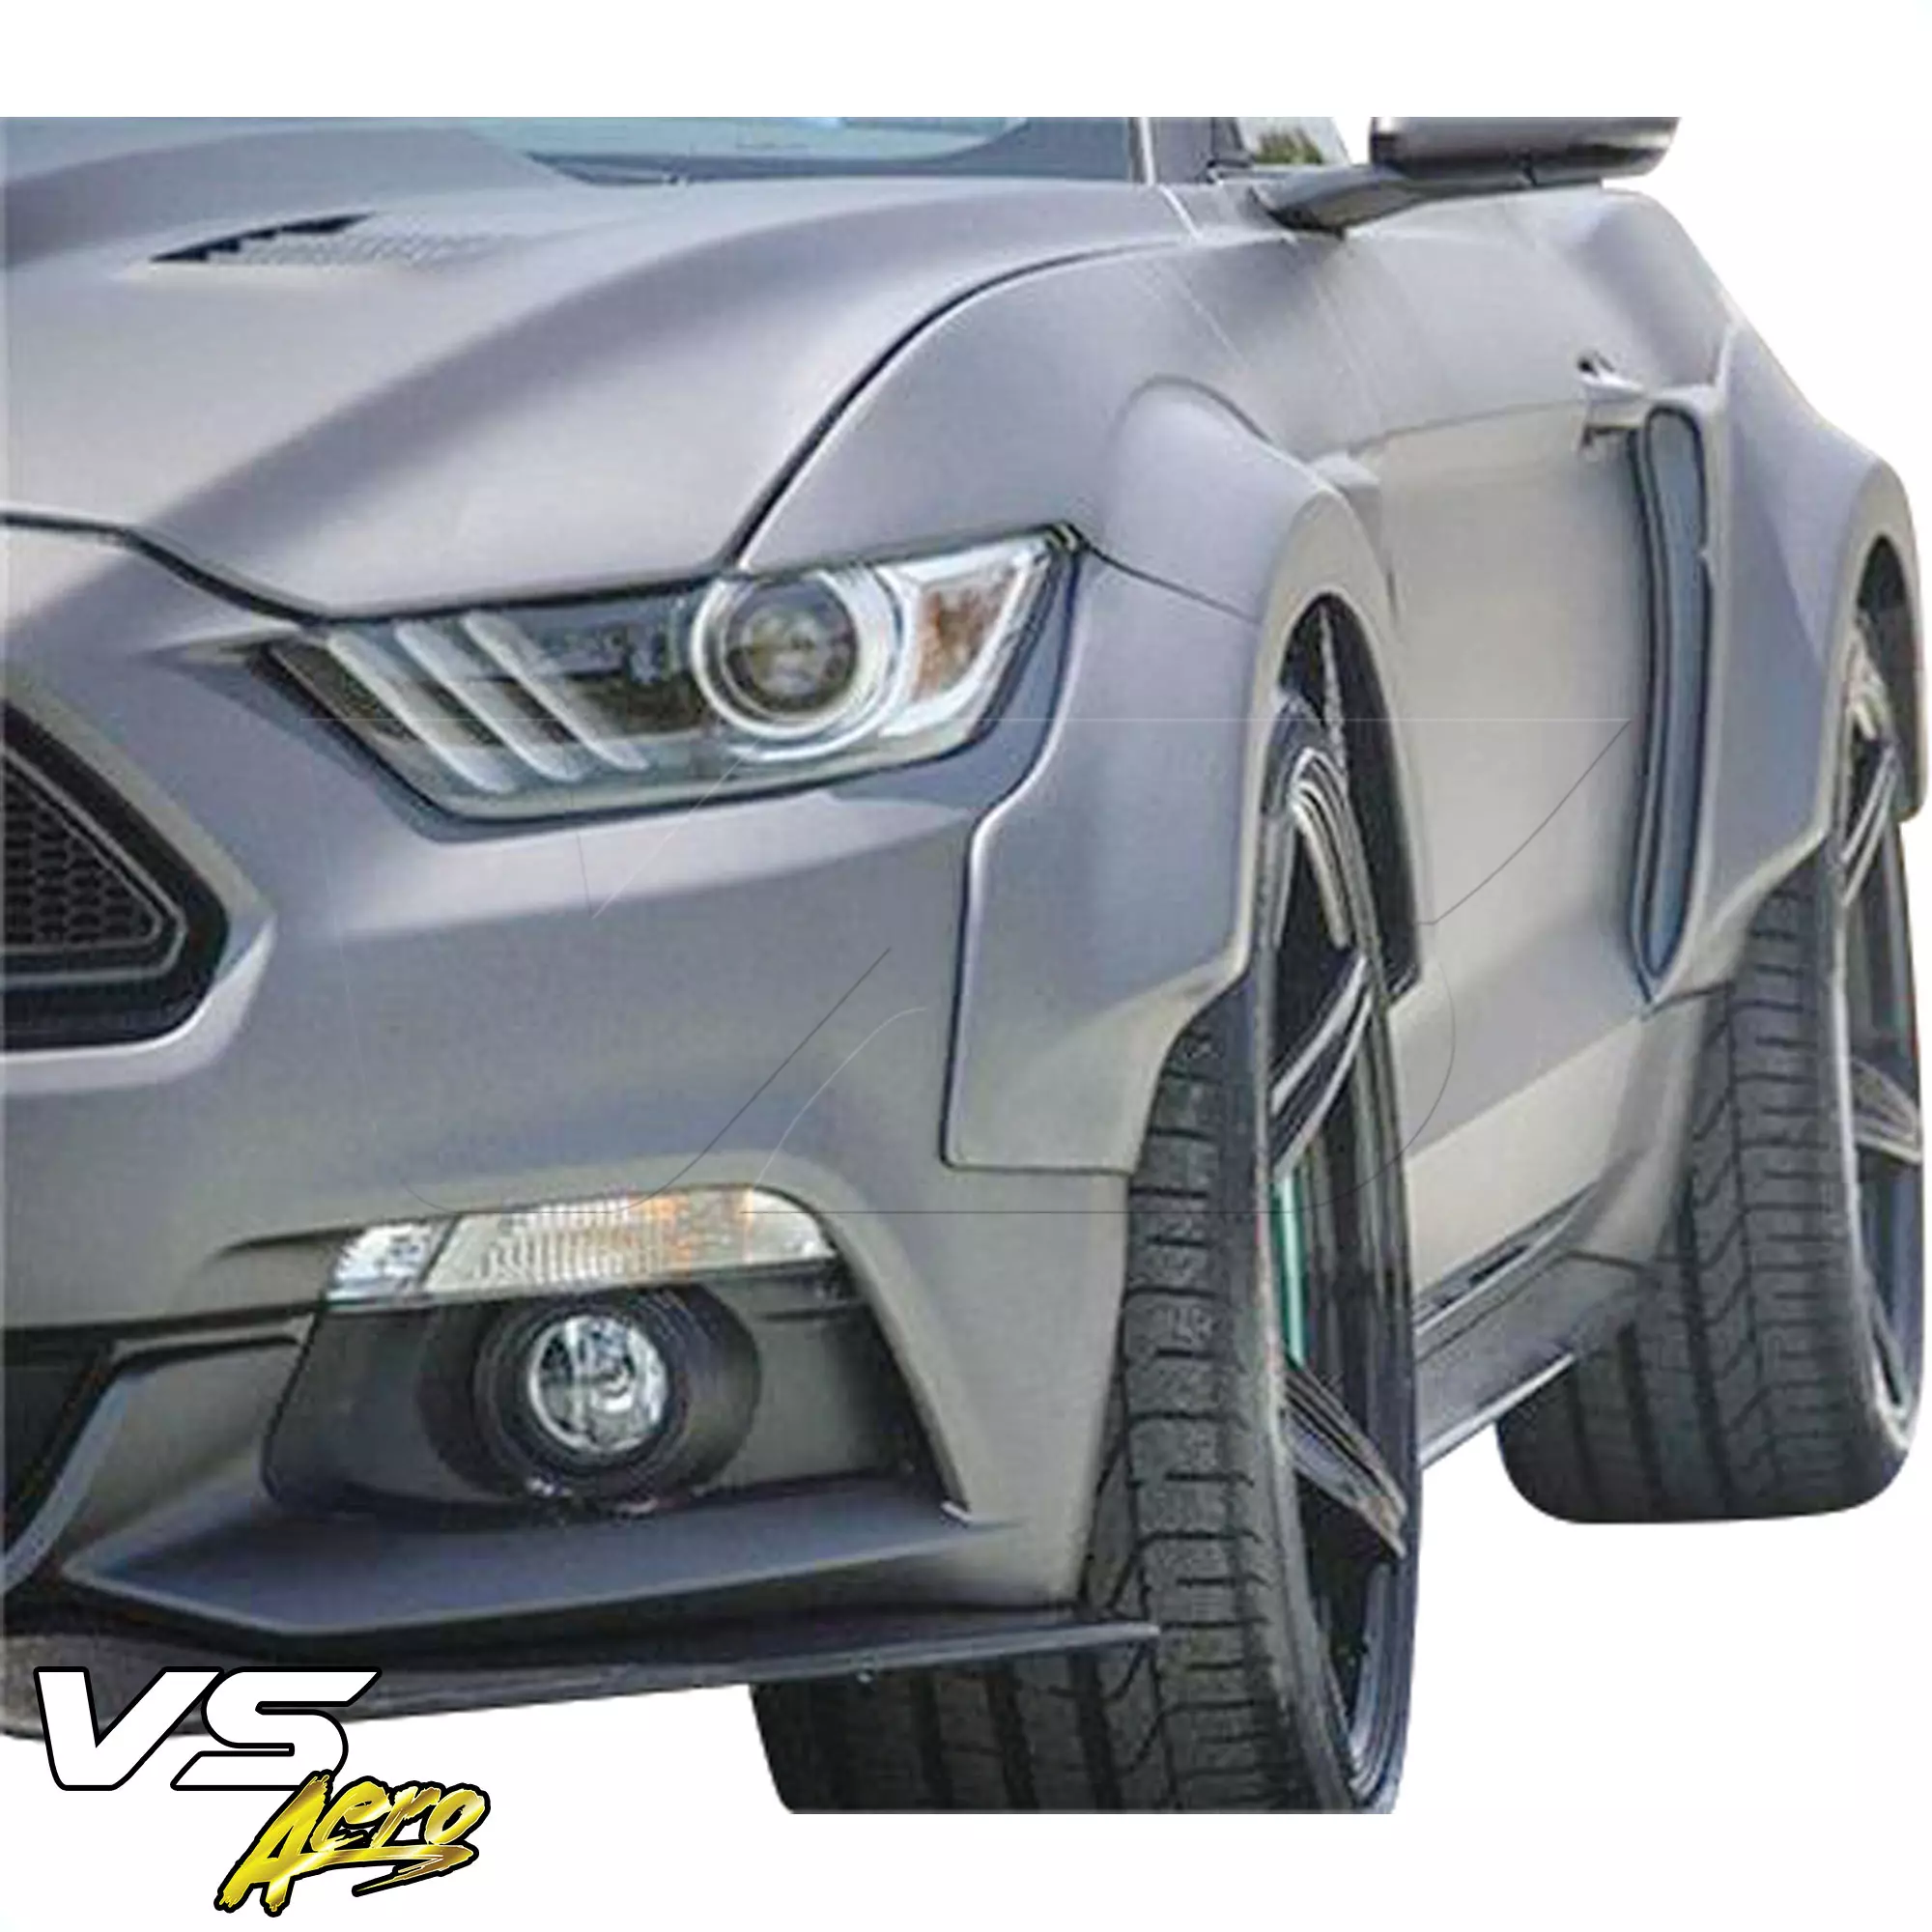 VSaero FRP KTOT Wide Body Fenders (front) > Ford Mustang 2015-2020 - Image 6